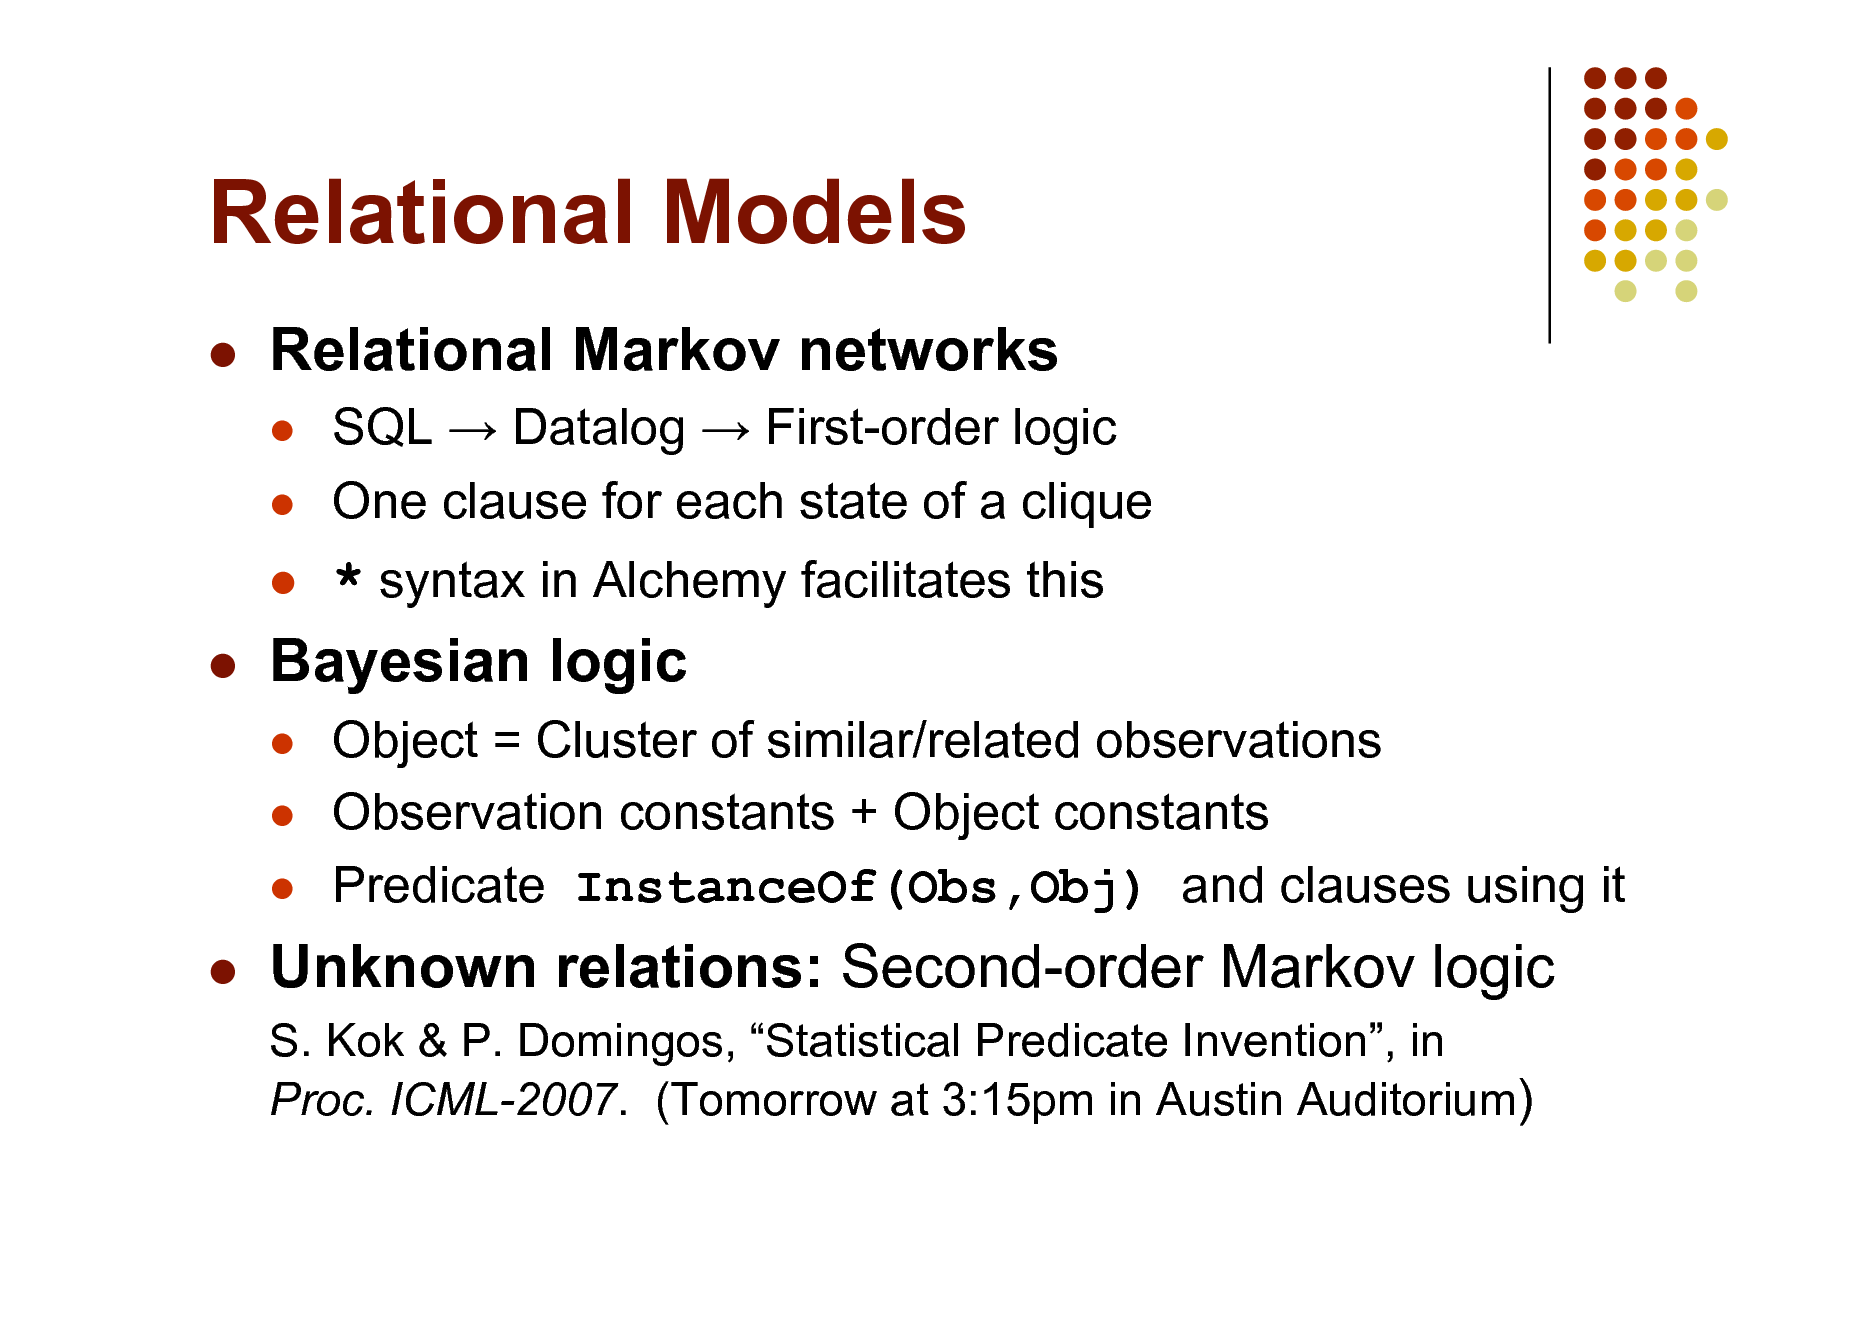 Slide: Relational Models


Relational Markov networks
 

SQL  Datalog  First-order logic One clause for each state of a clique



* syntax in Alchemy facilitates this
Object = Cluster of similar/related observations Observation constants + Object constants Predicate InstanceOf(Obs,Obj) and clauses using it



Bayesian logic
  



Unknown relations: Second-order Markov logic
S. Kok & P. Domingos, Statistical Predicate Invention, in Proc. ICML-2007. (Tomorrow at 3:15pm in Austin Auditorium)

